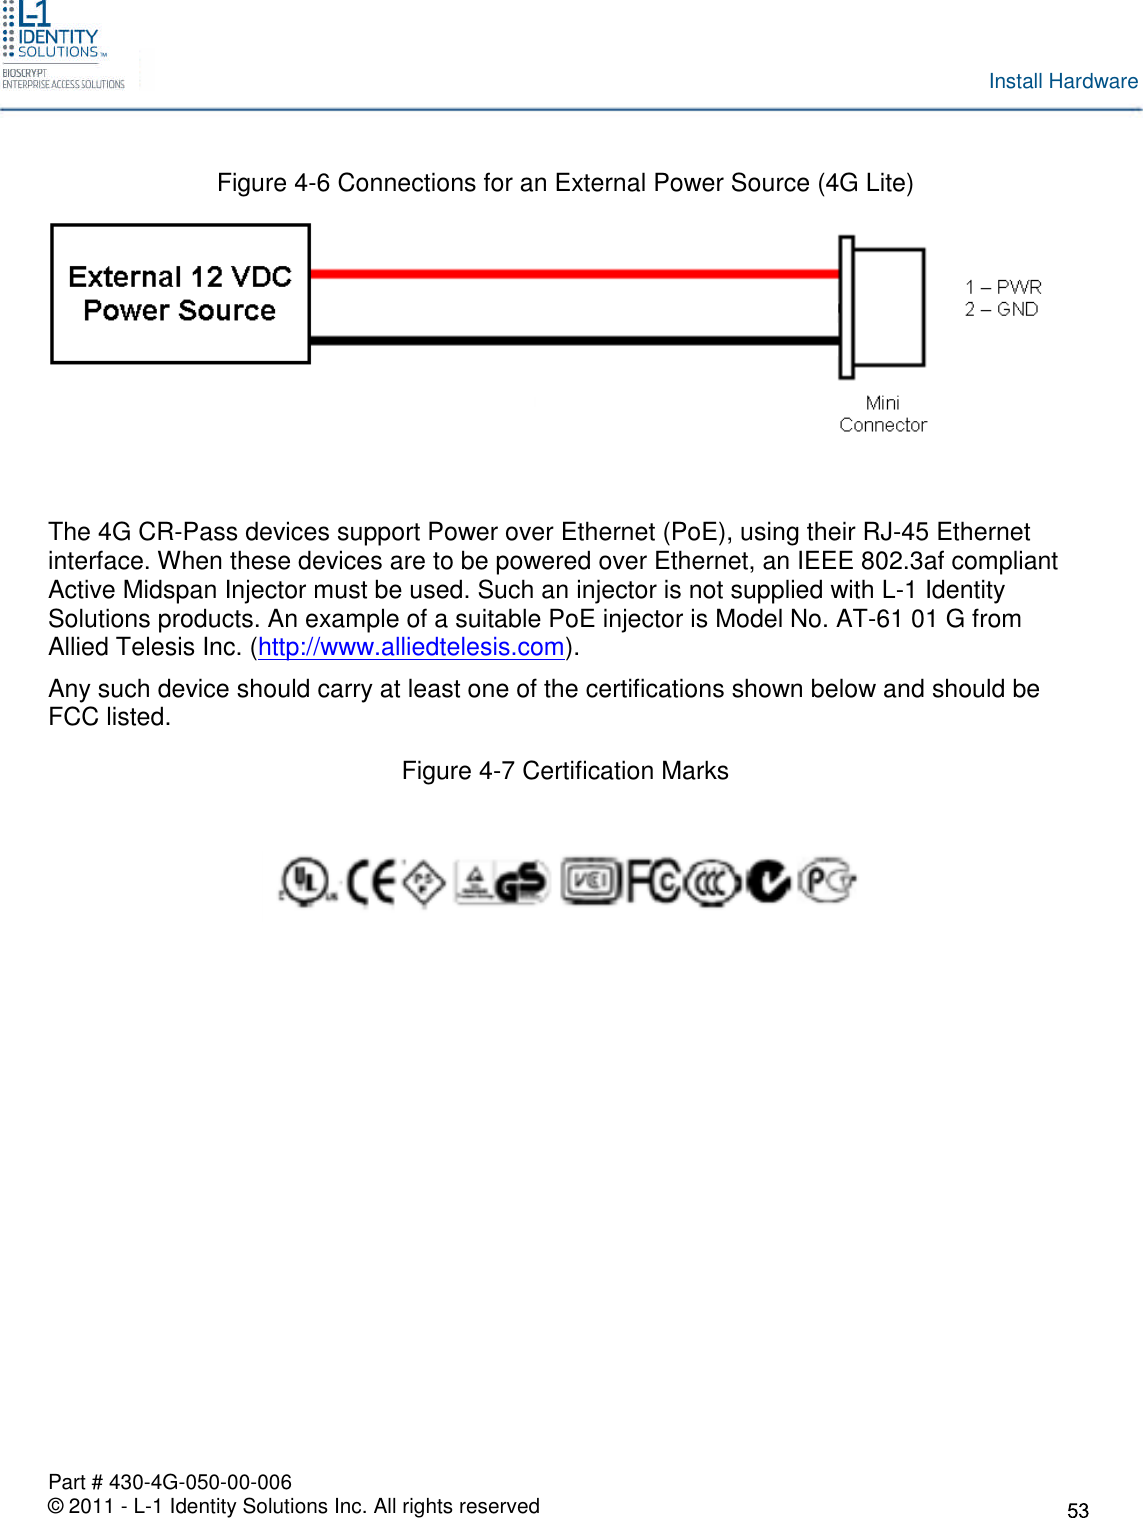 Part # 430-4G-050-00-006© 2011 - L-1 Identity Solutions Inc. All rights reservedInstall HardwareFigure 4-6 Connections for an External Power Source (4G Lite)The 4G CR-Pass devices support Power over Ethernet (PoE), using their RJ-45 Ethernetinterface. When these devices are to be powered over Ethernet, an IEEE 802.3af compliantActive Midspan Injector must be used. Such an injector is not supplied with L-1 IdentitySolutions products. An example of a suitable PoE injector is Model No. AT-61 01 G fromAllied Telesis Inc. (http://www.alliedtelesis.com).Any such device should carry at least one of the certifications shown below and should beFCC listed.Figure 4-7 Certification Marks